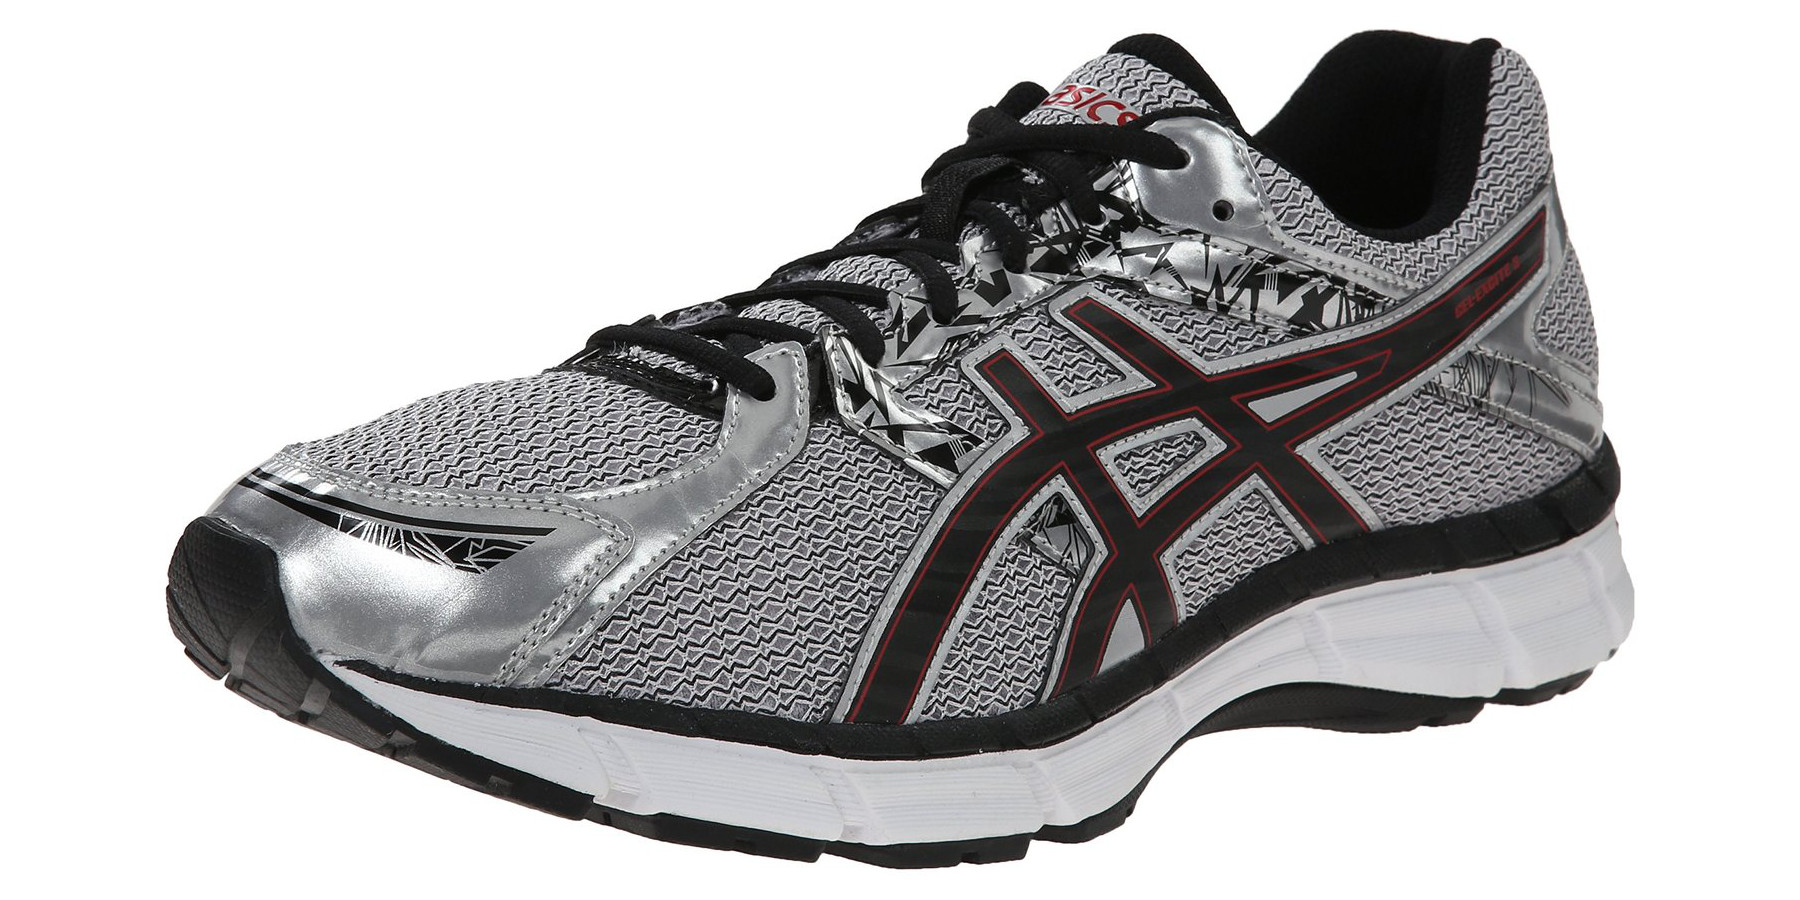 Grab a new pair of ASICS running shoes 